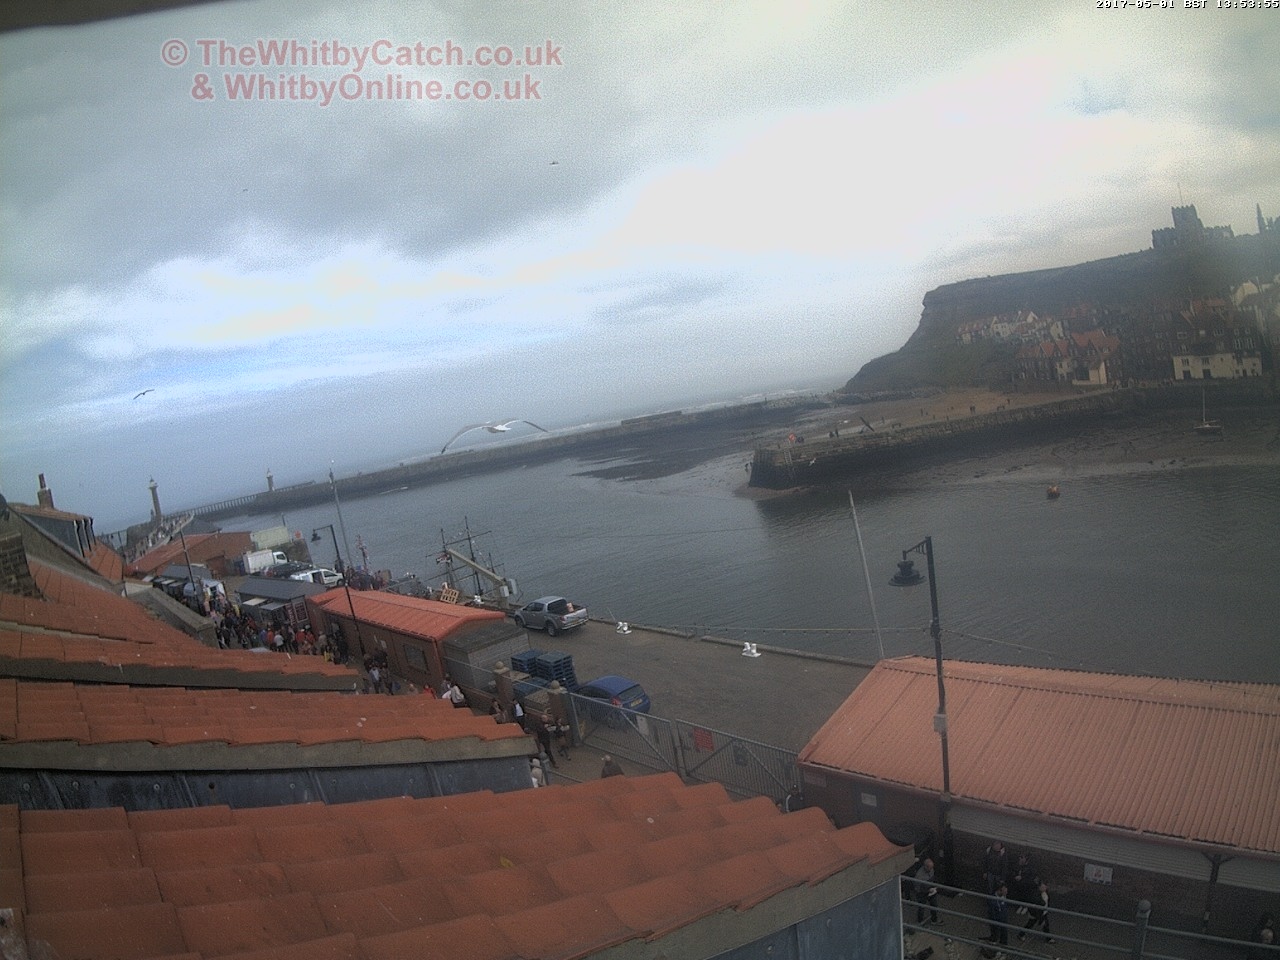 Whitby Mon 1st May 2017 13:54.